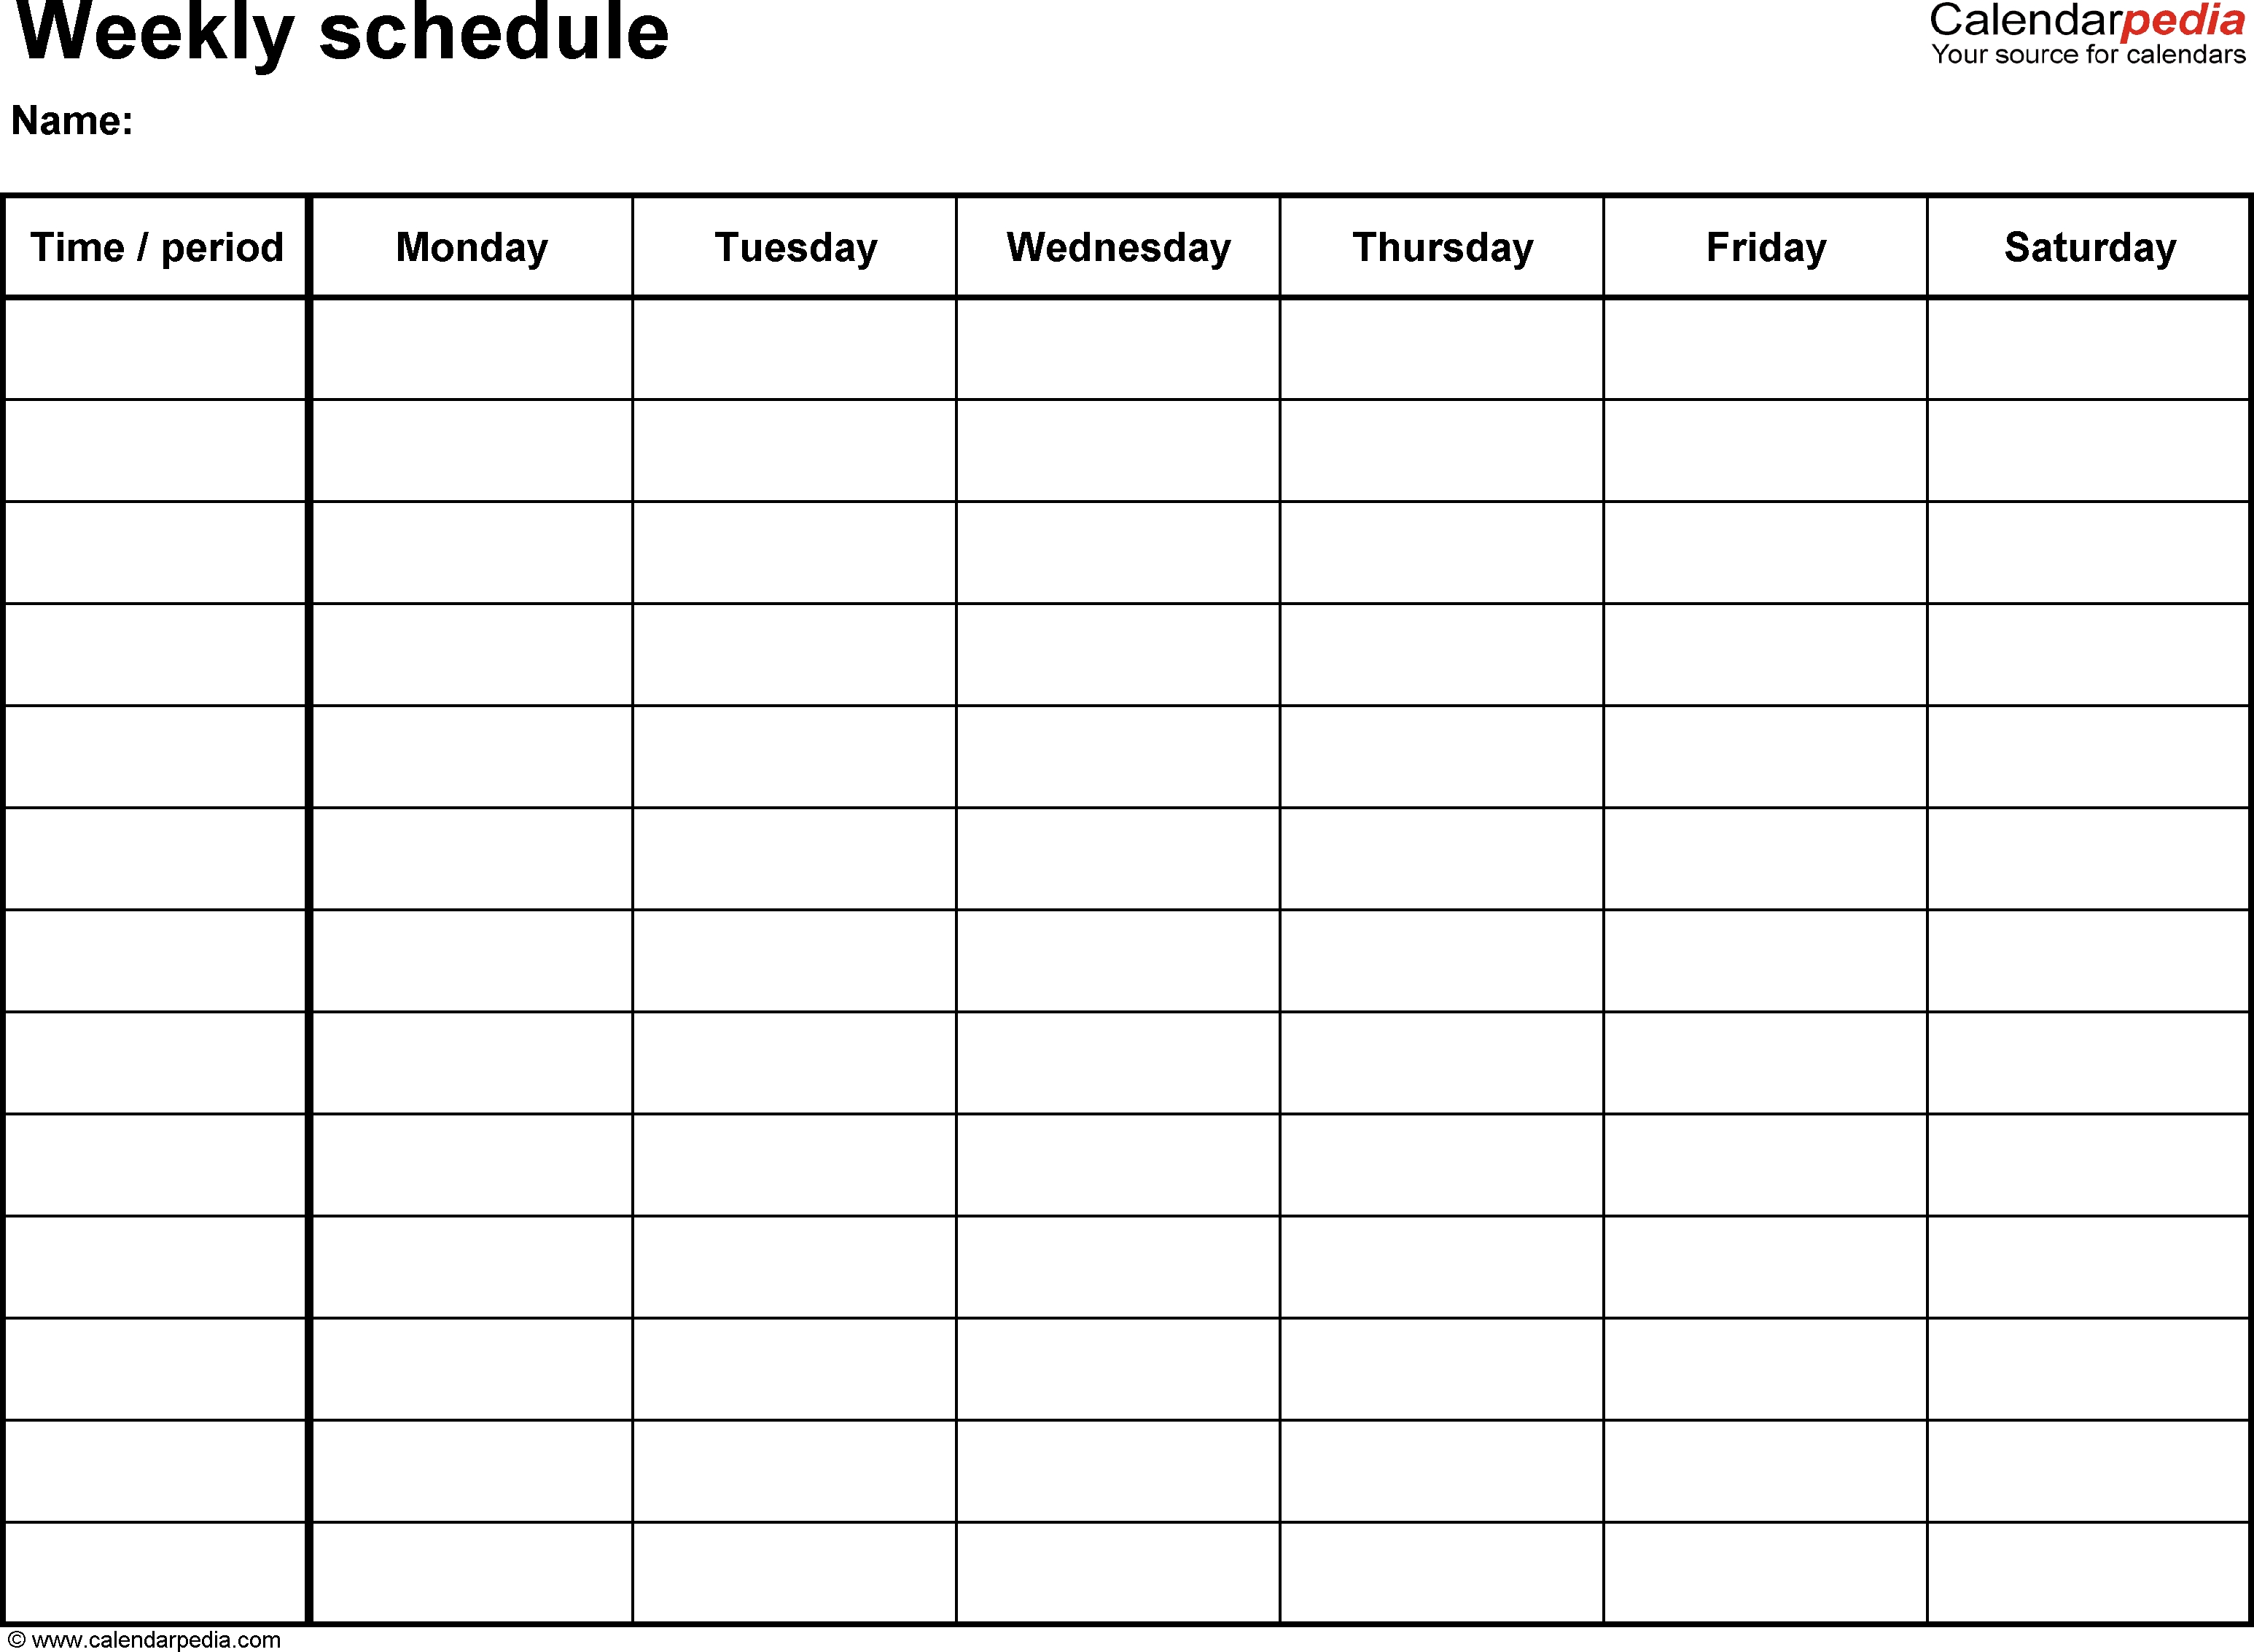 Free Weekly Schedule Templates For Pdf - 18 Templates with regard to Monday Through Friday Blank Schedule Print Out